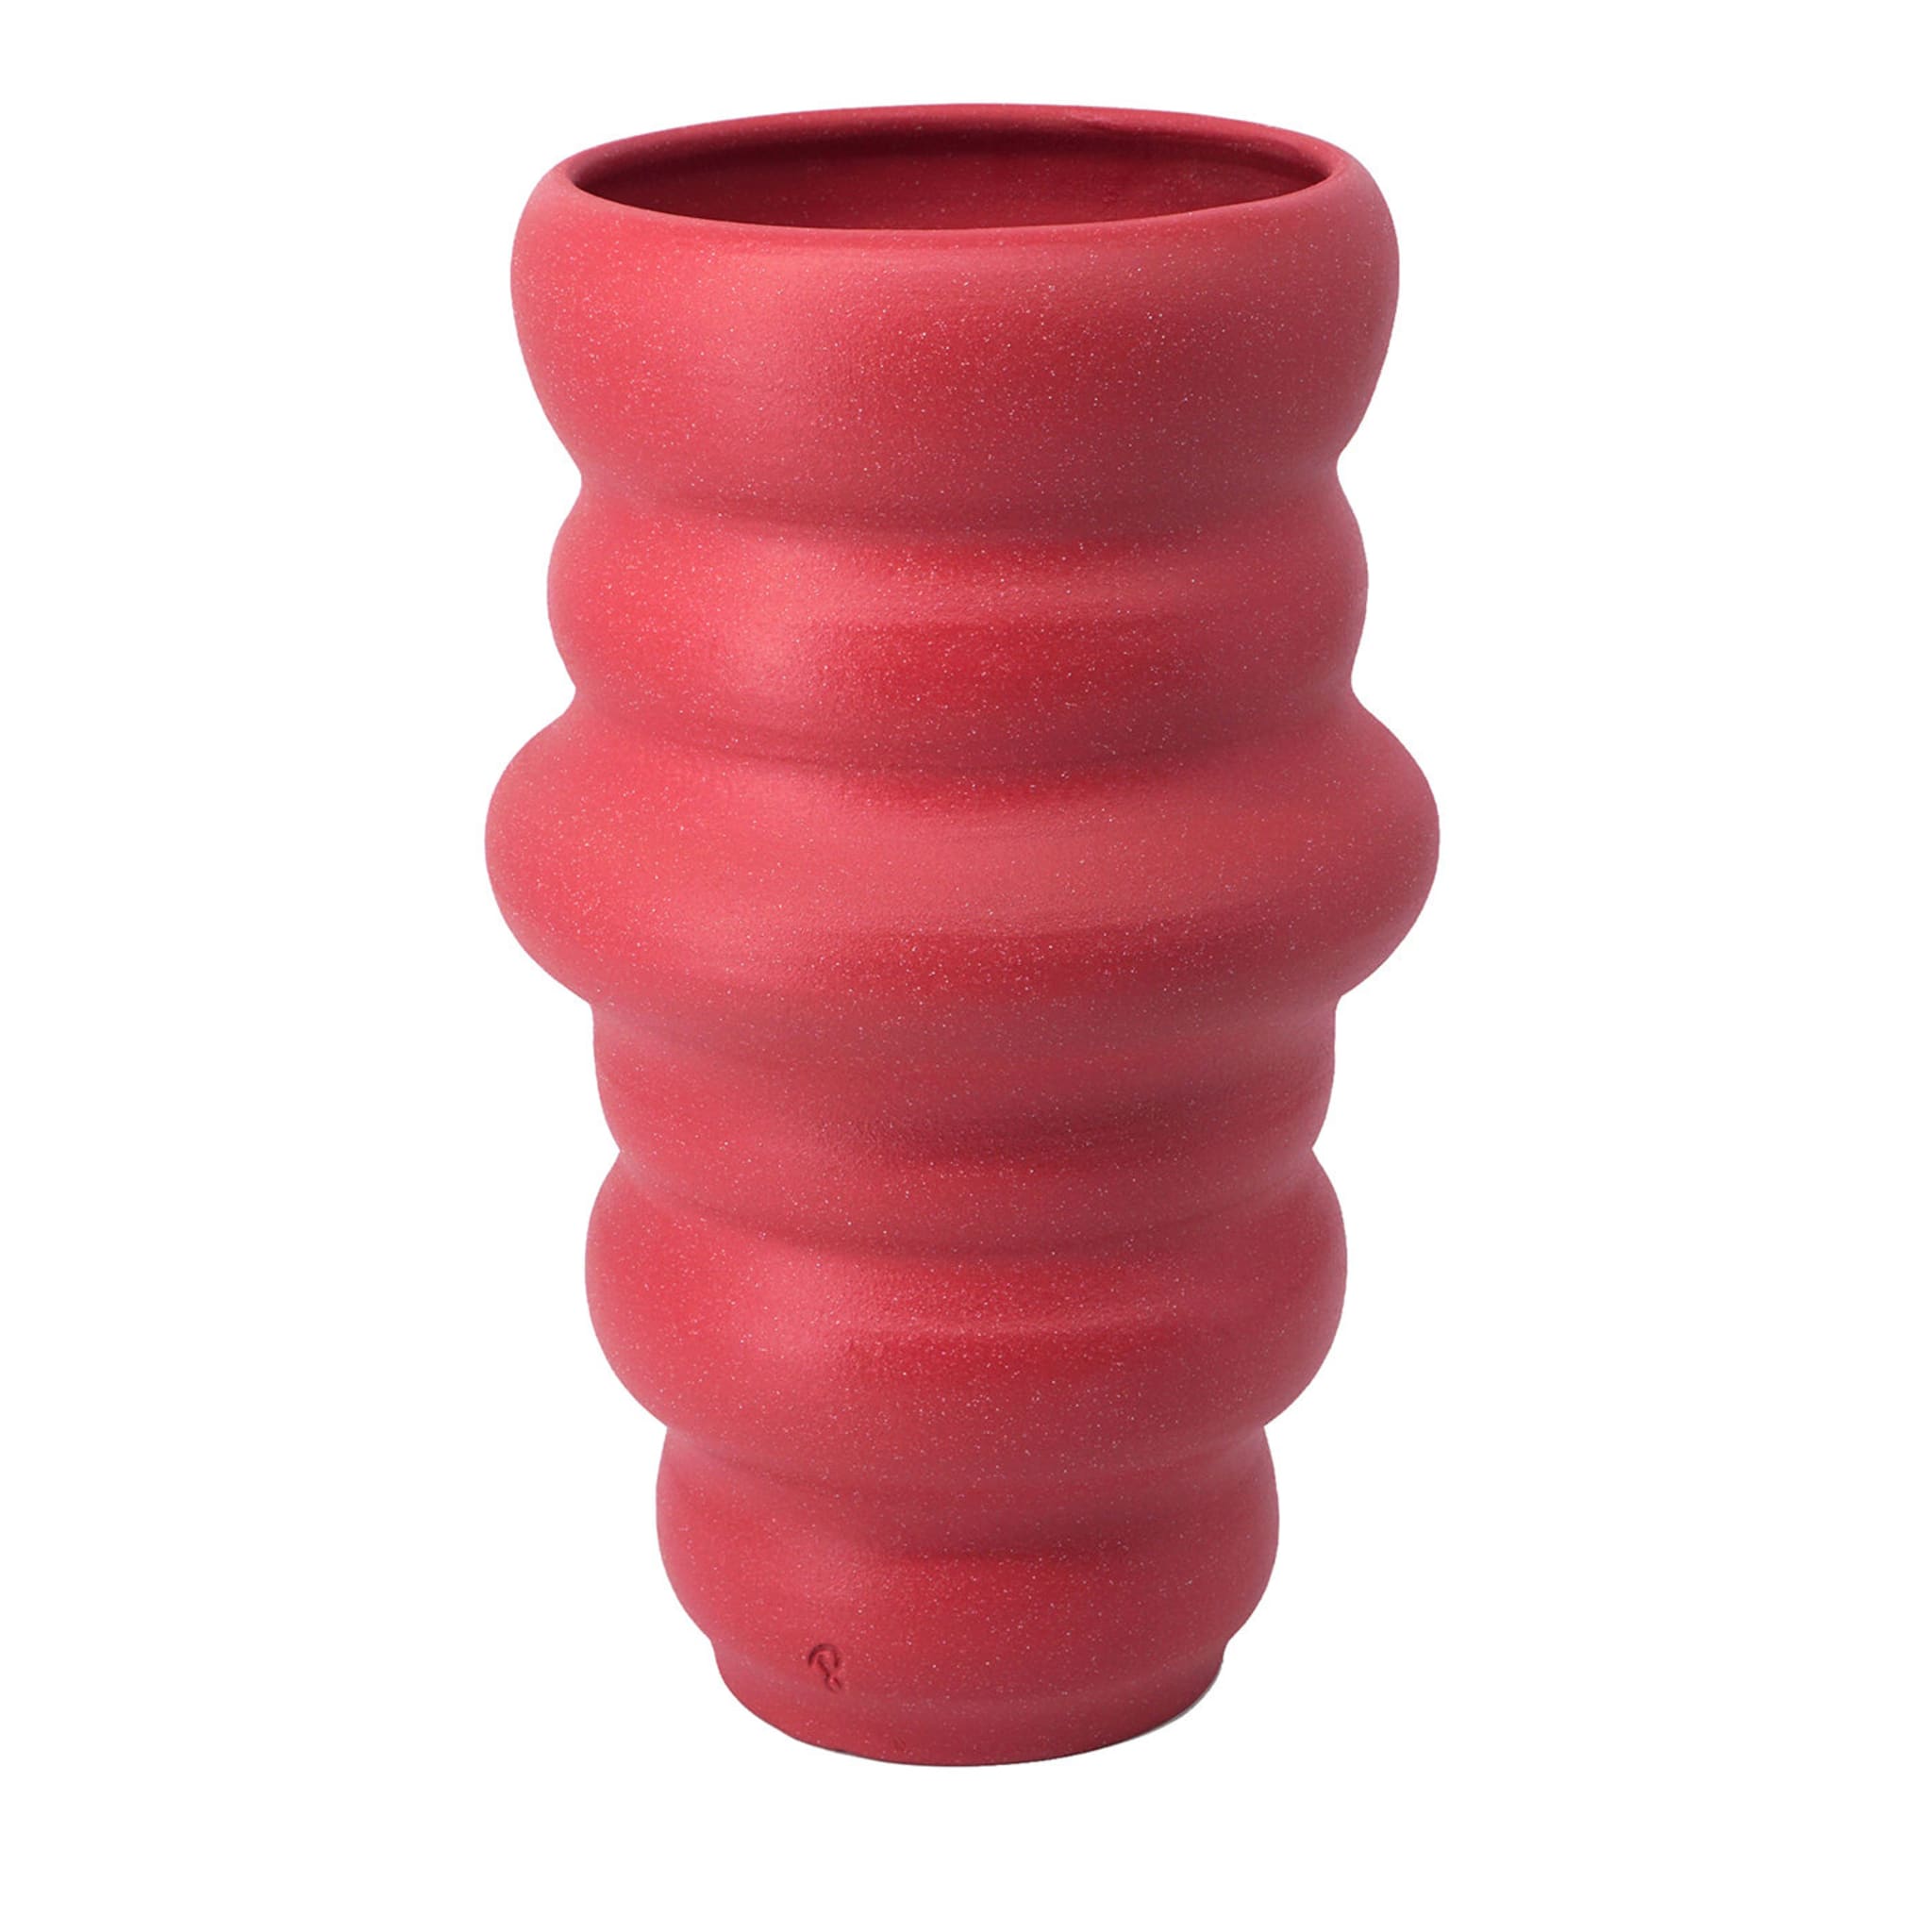 Crisalide Red Vase #3 - Main view